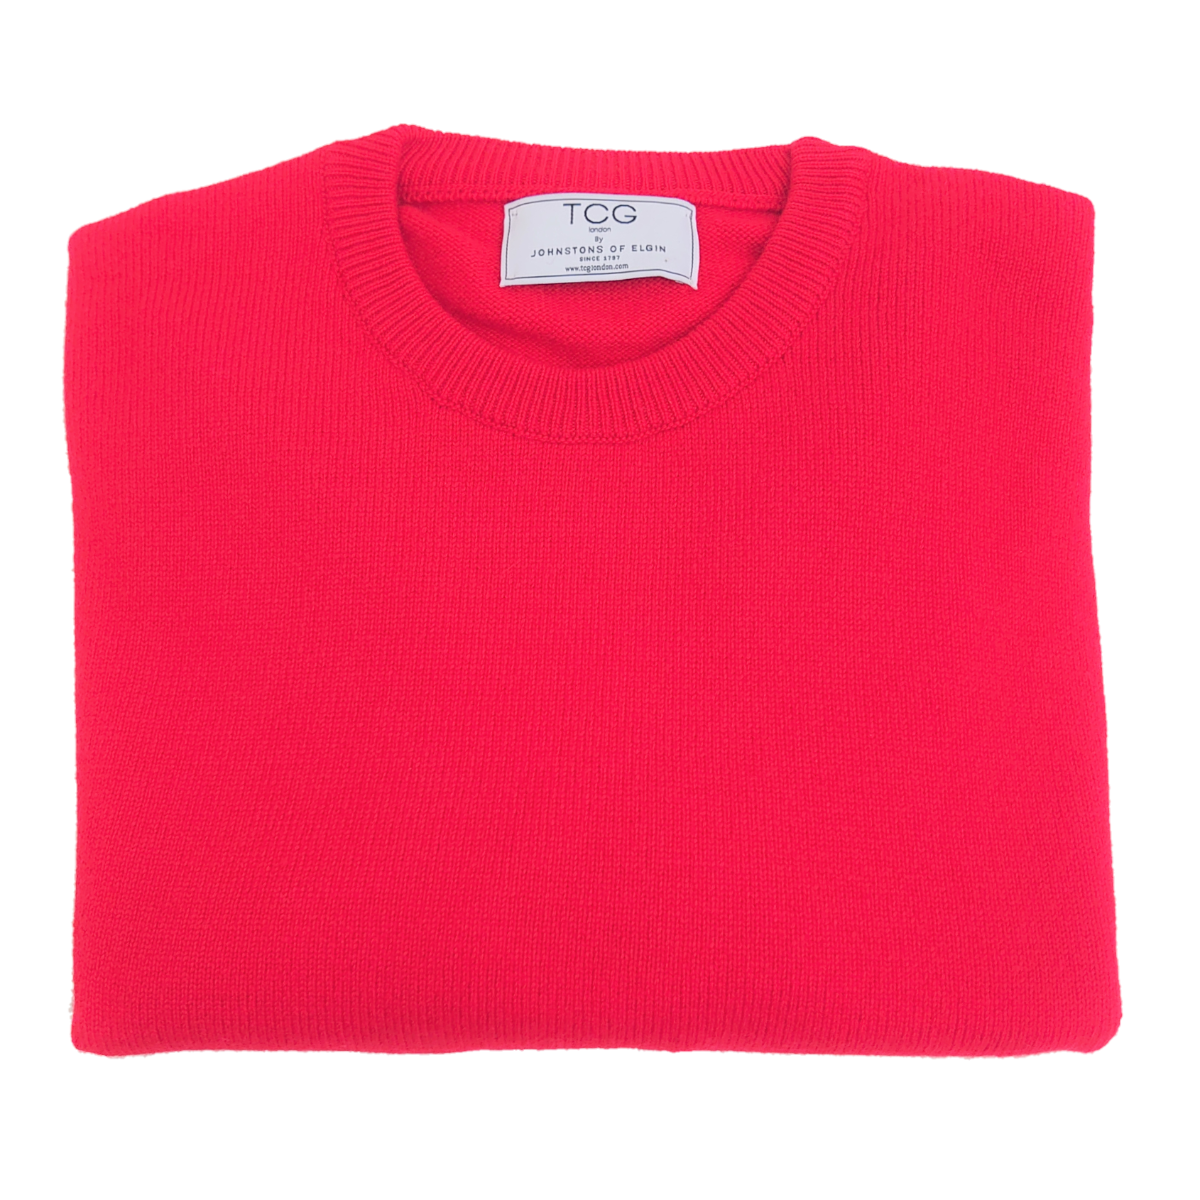 Men's Relaxed Fit Round Neck 100% Pure Cashmere Jumper - Red - L